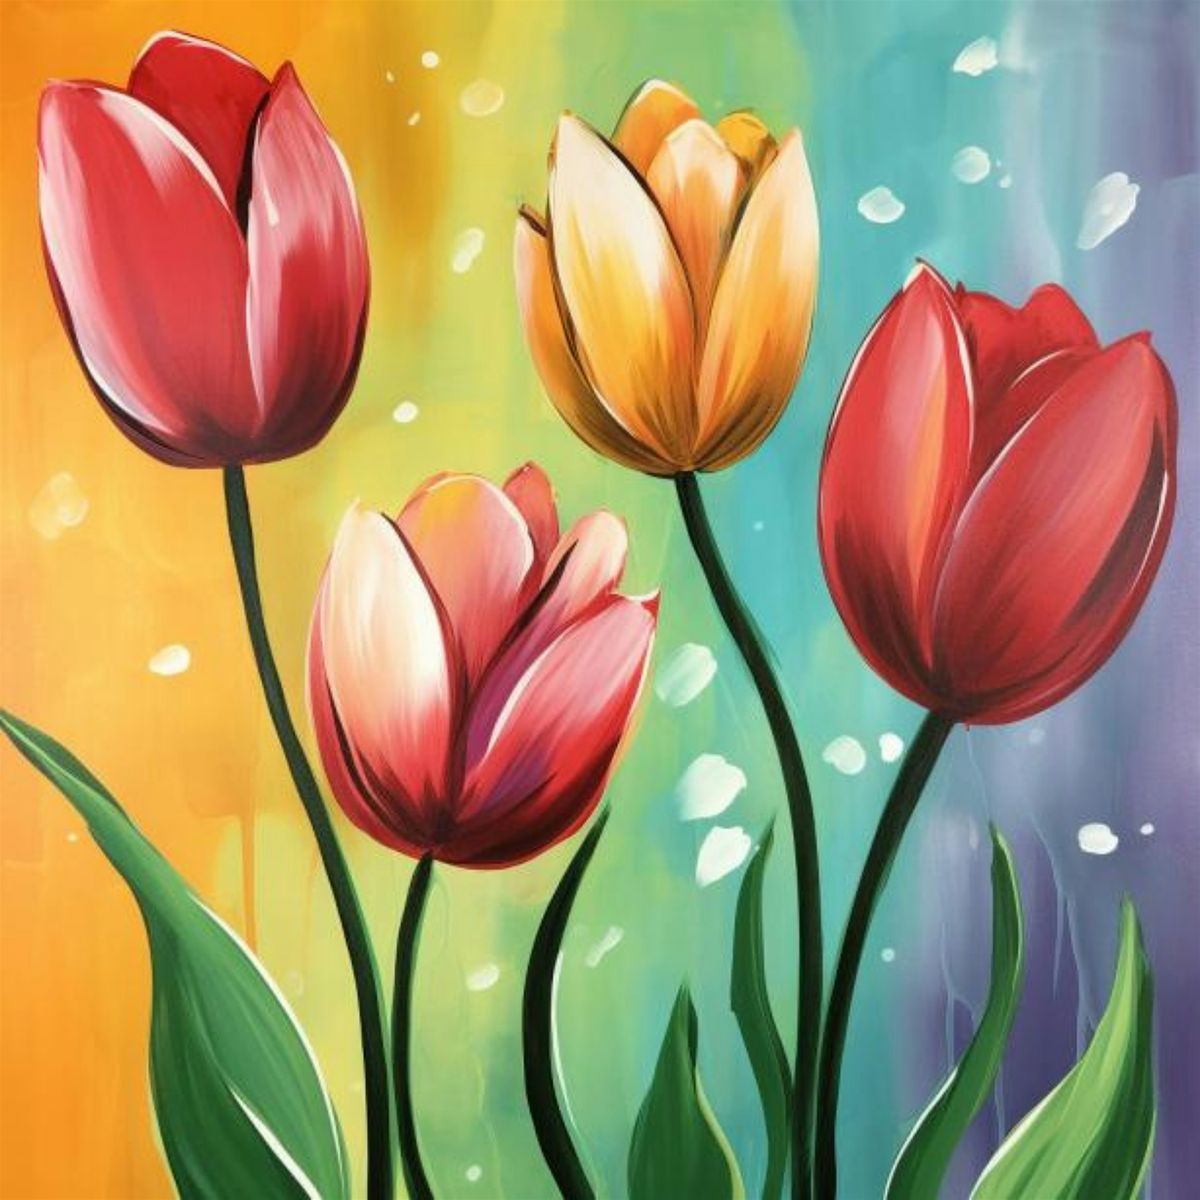 Tulips Paint Party!